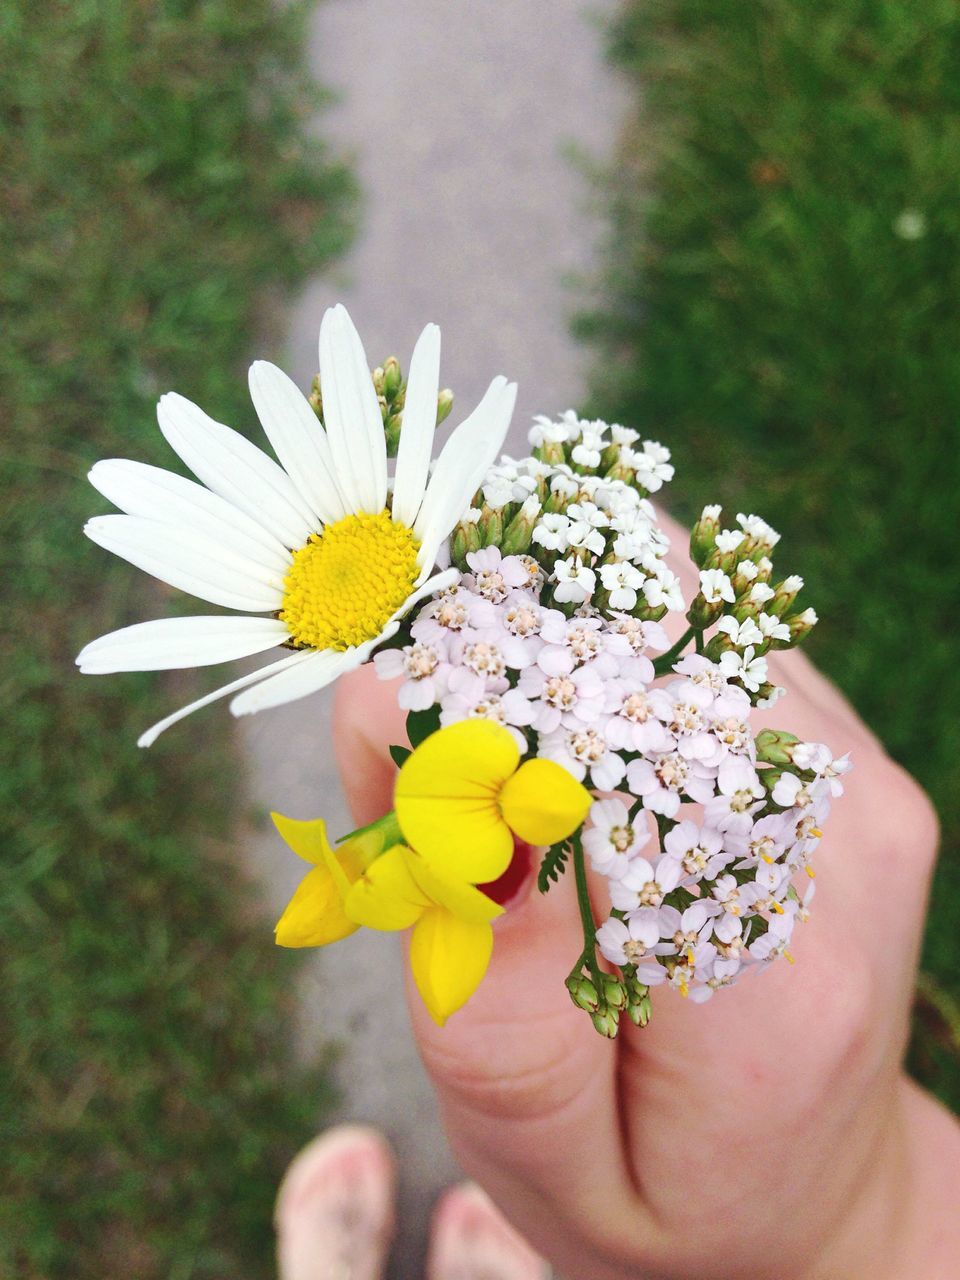 flower, freshness, person, petal, fragility, holding, flower head, yellow, part of, close-up, focus on foreground, beauty in nature, cropped, pollen, nature, white color, growth, unrecognizable person, human finger, blooming, daisy, stamen, blossom, in bloom, plant, day, outdoors, botany, personal perspective, softness, selective focus